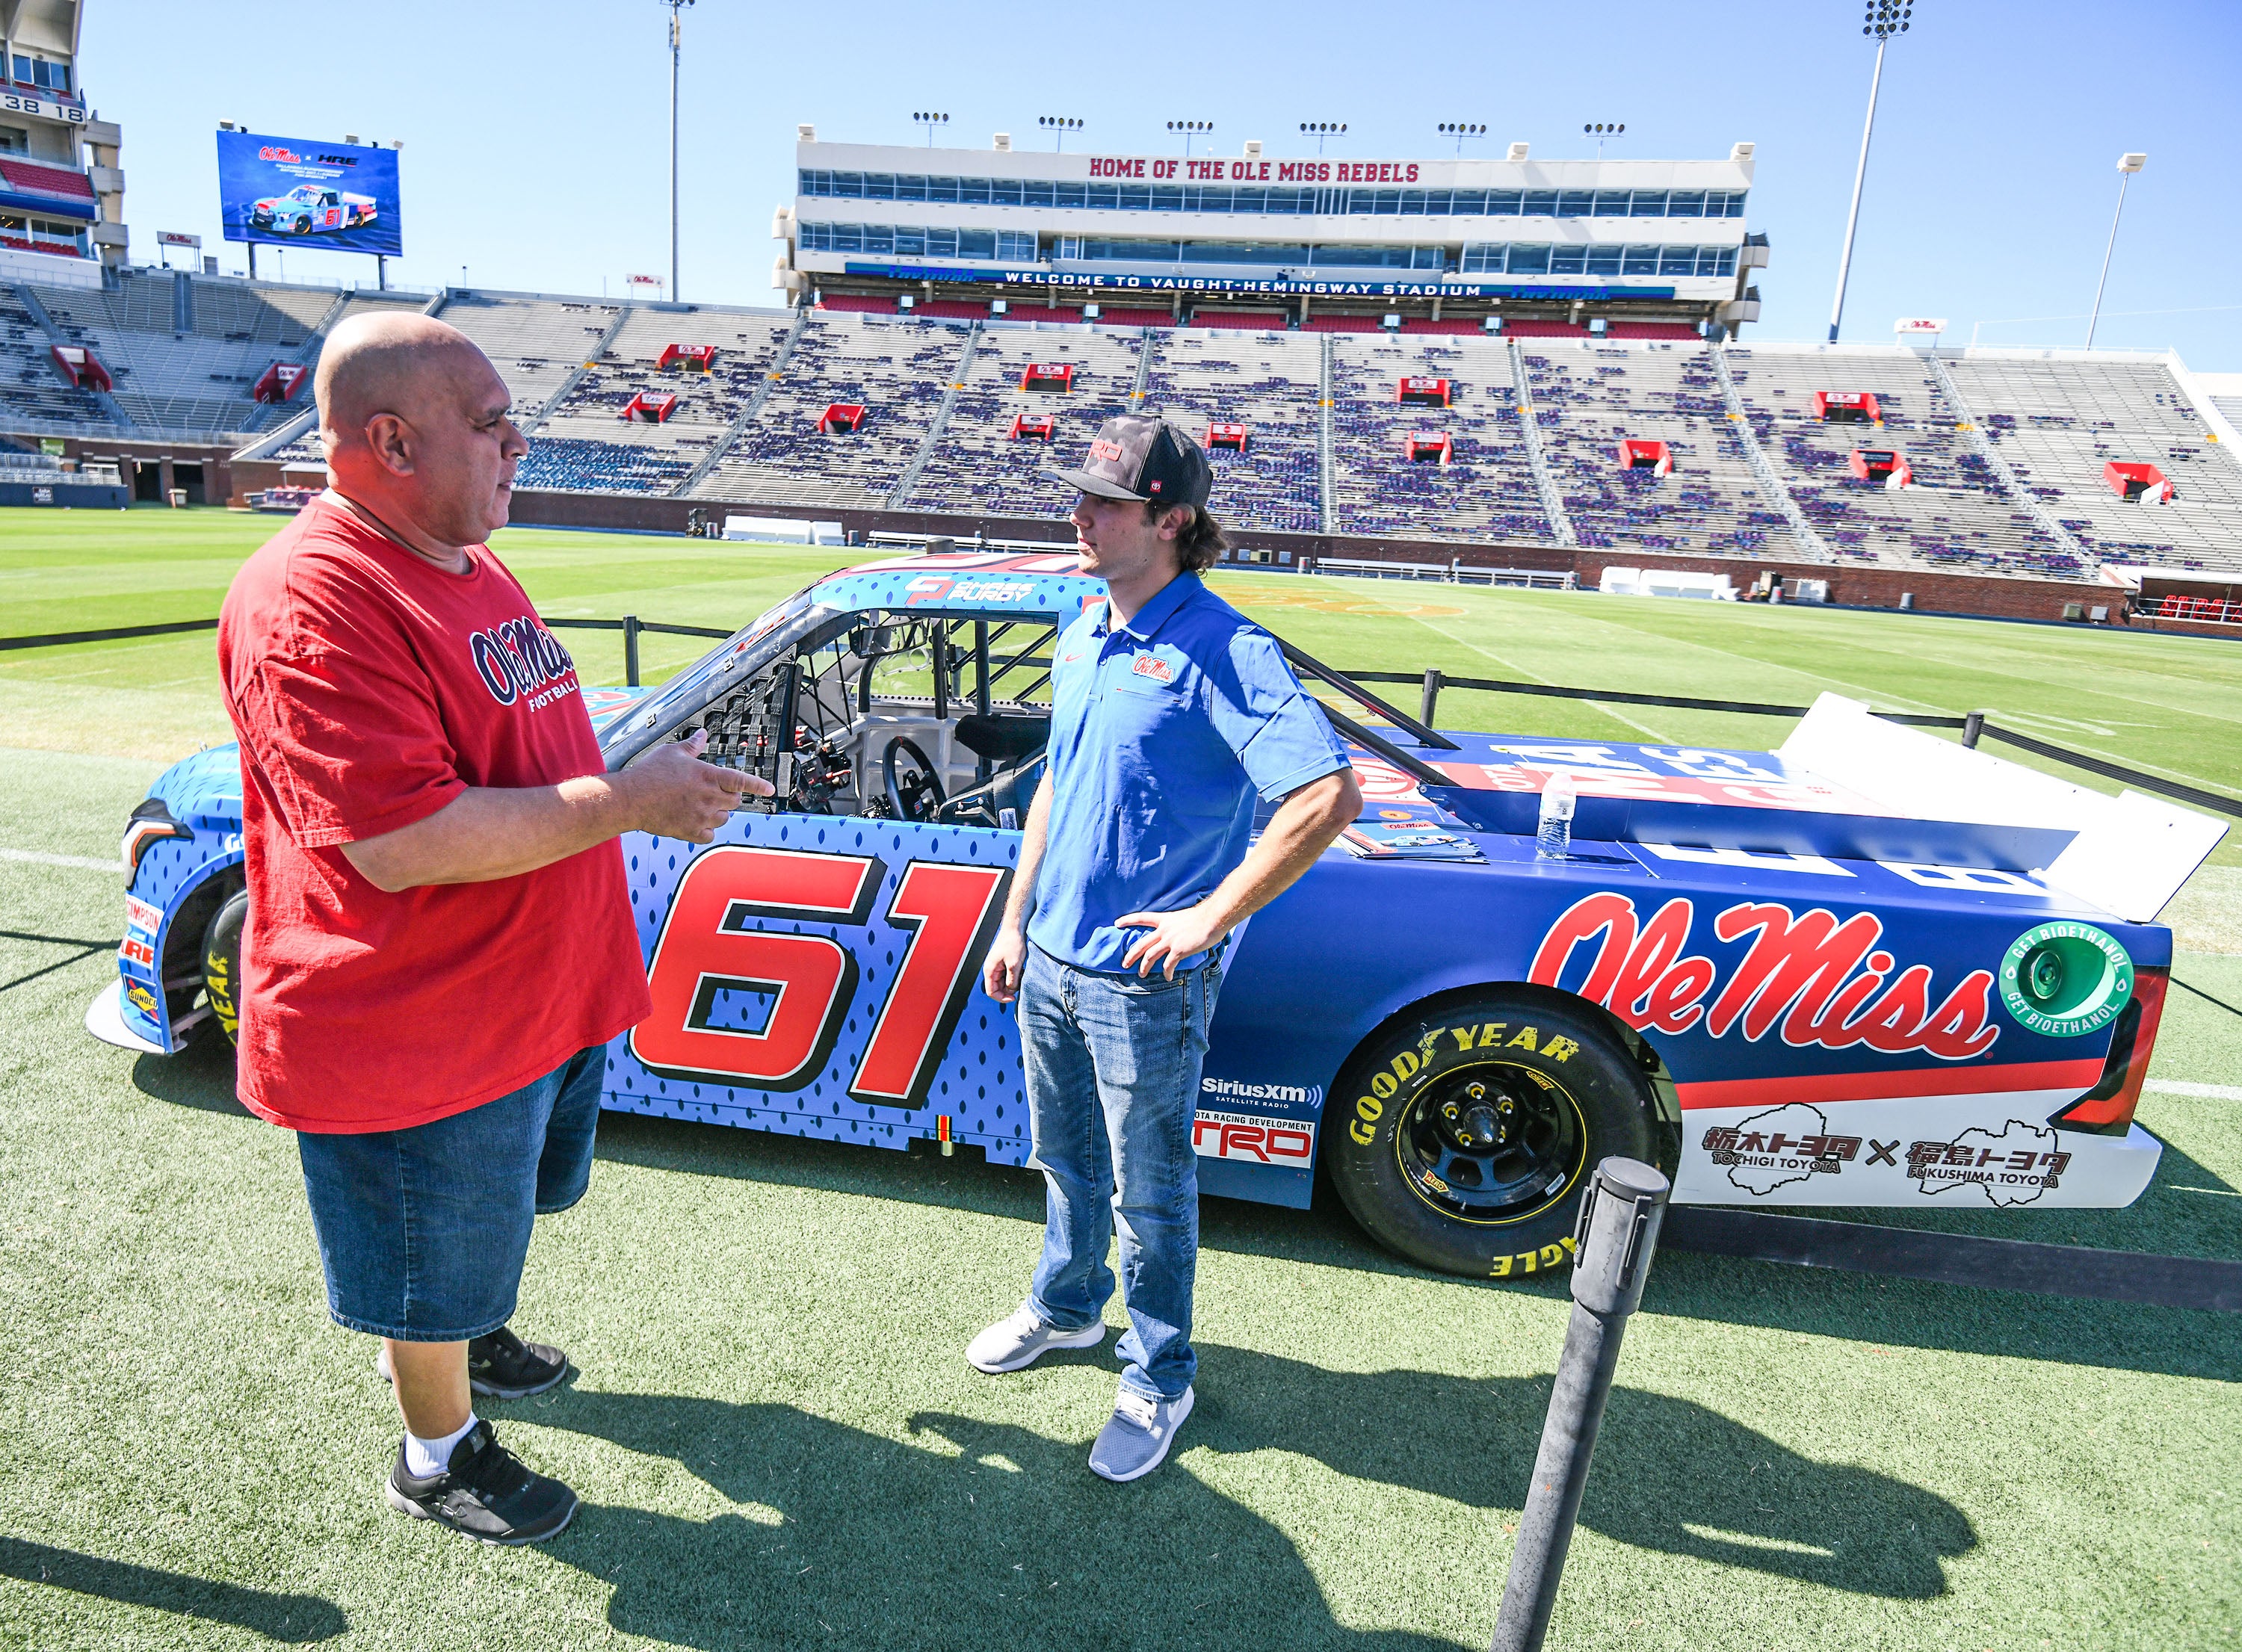 Talladega NASCAR race to feature Ole Miss themed truck The Oxford